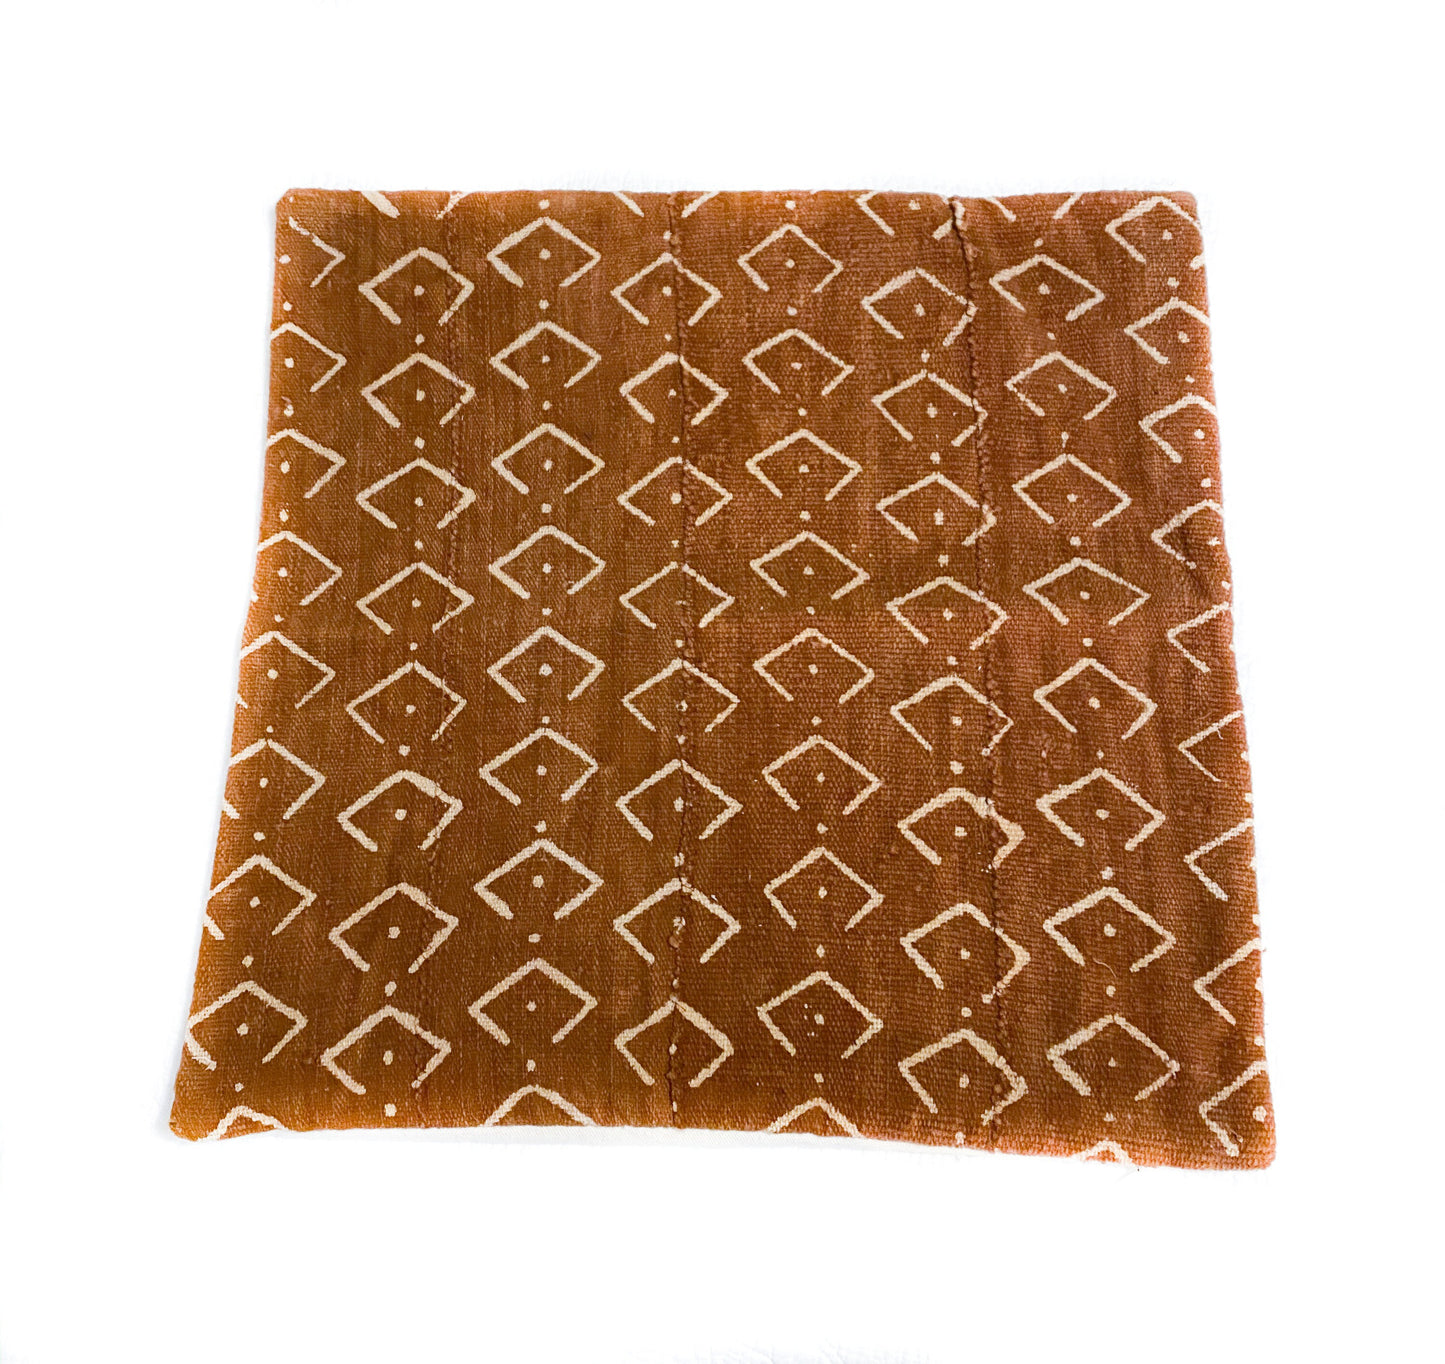 Rust, Terracotta, African Mud Cloth Pillow Cover, Mudcloth Pillows, "Scale'